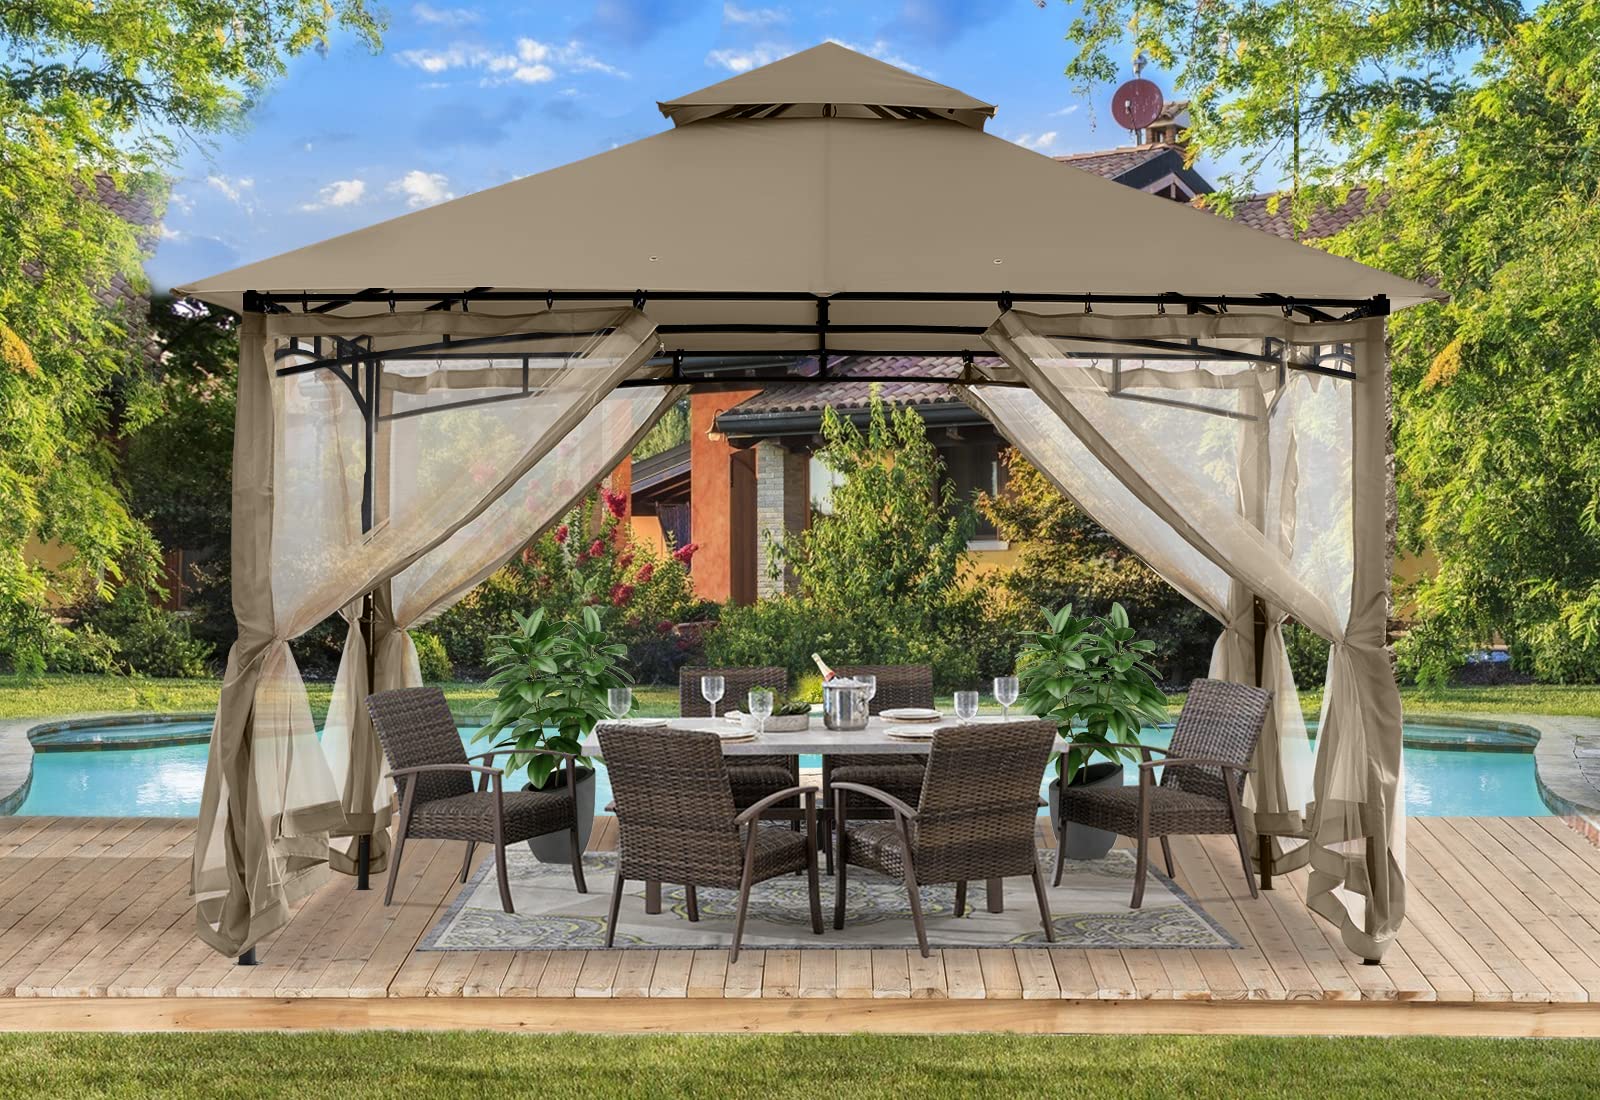 Sturdy Patio Gazebo 10 Ft x 12 Ft with Mosquito Netting by ABCCANOPY